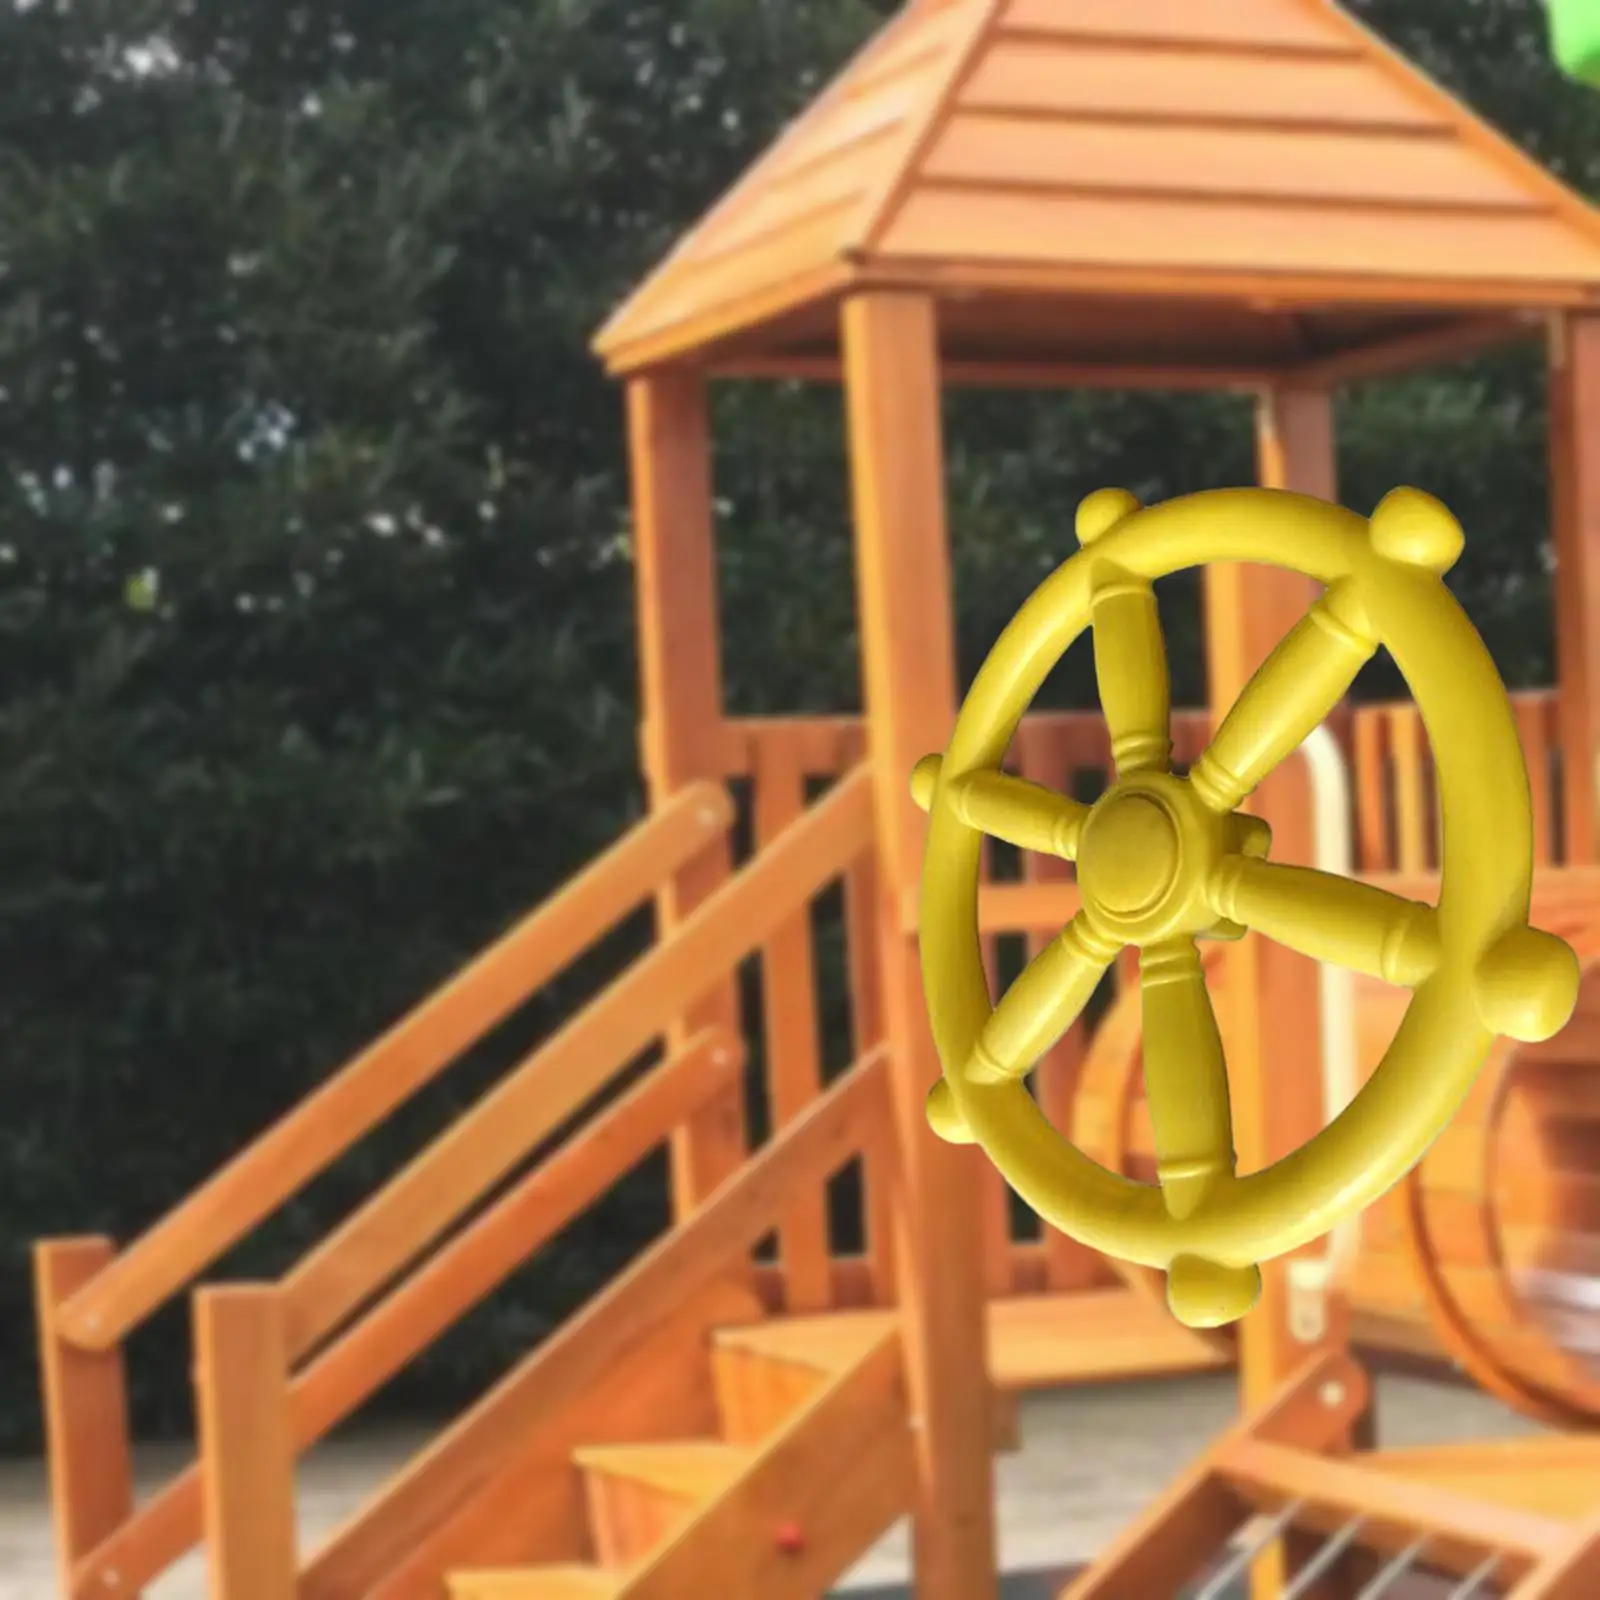 Pirate Ship Wheel Multipurpose Climb with Screws Playground Equipment Kids Steering Wheel Toy for Park Play House Treehouse